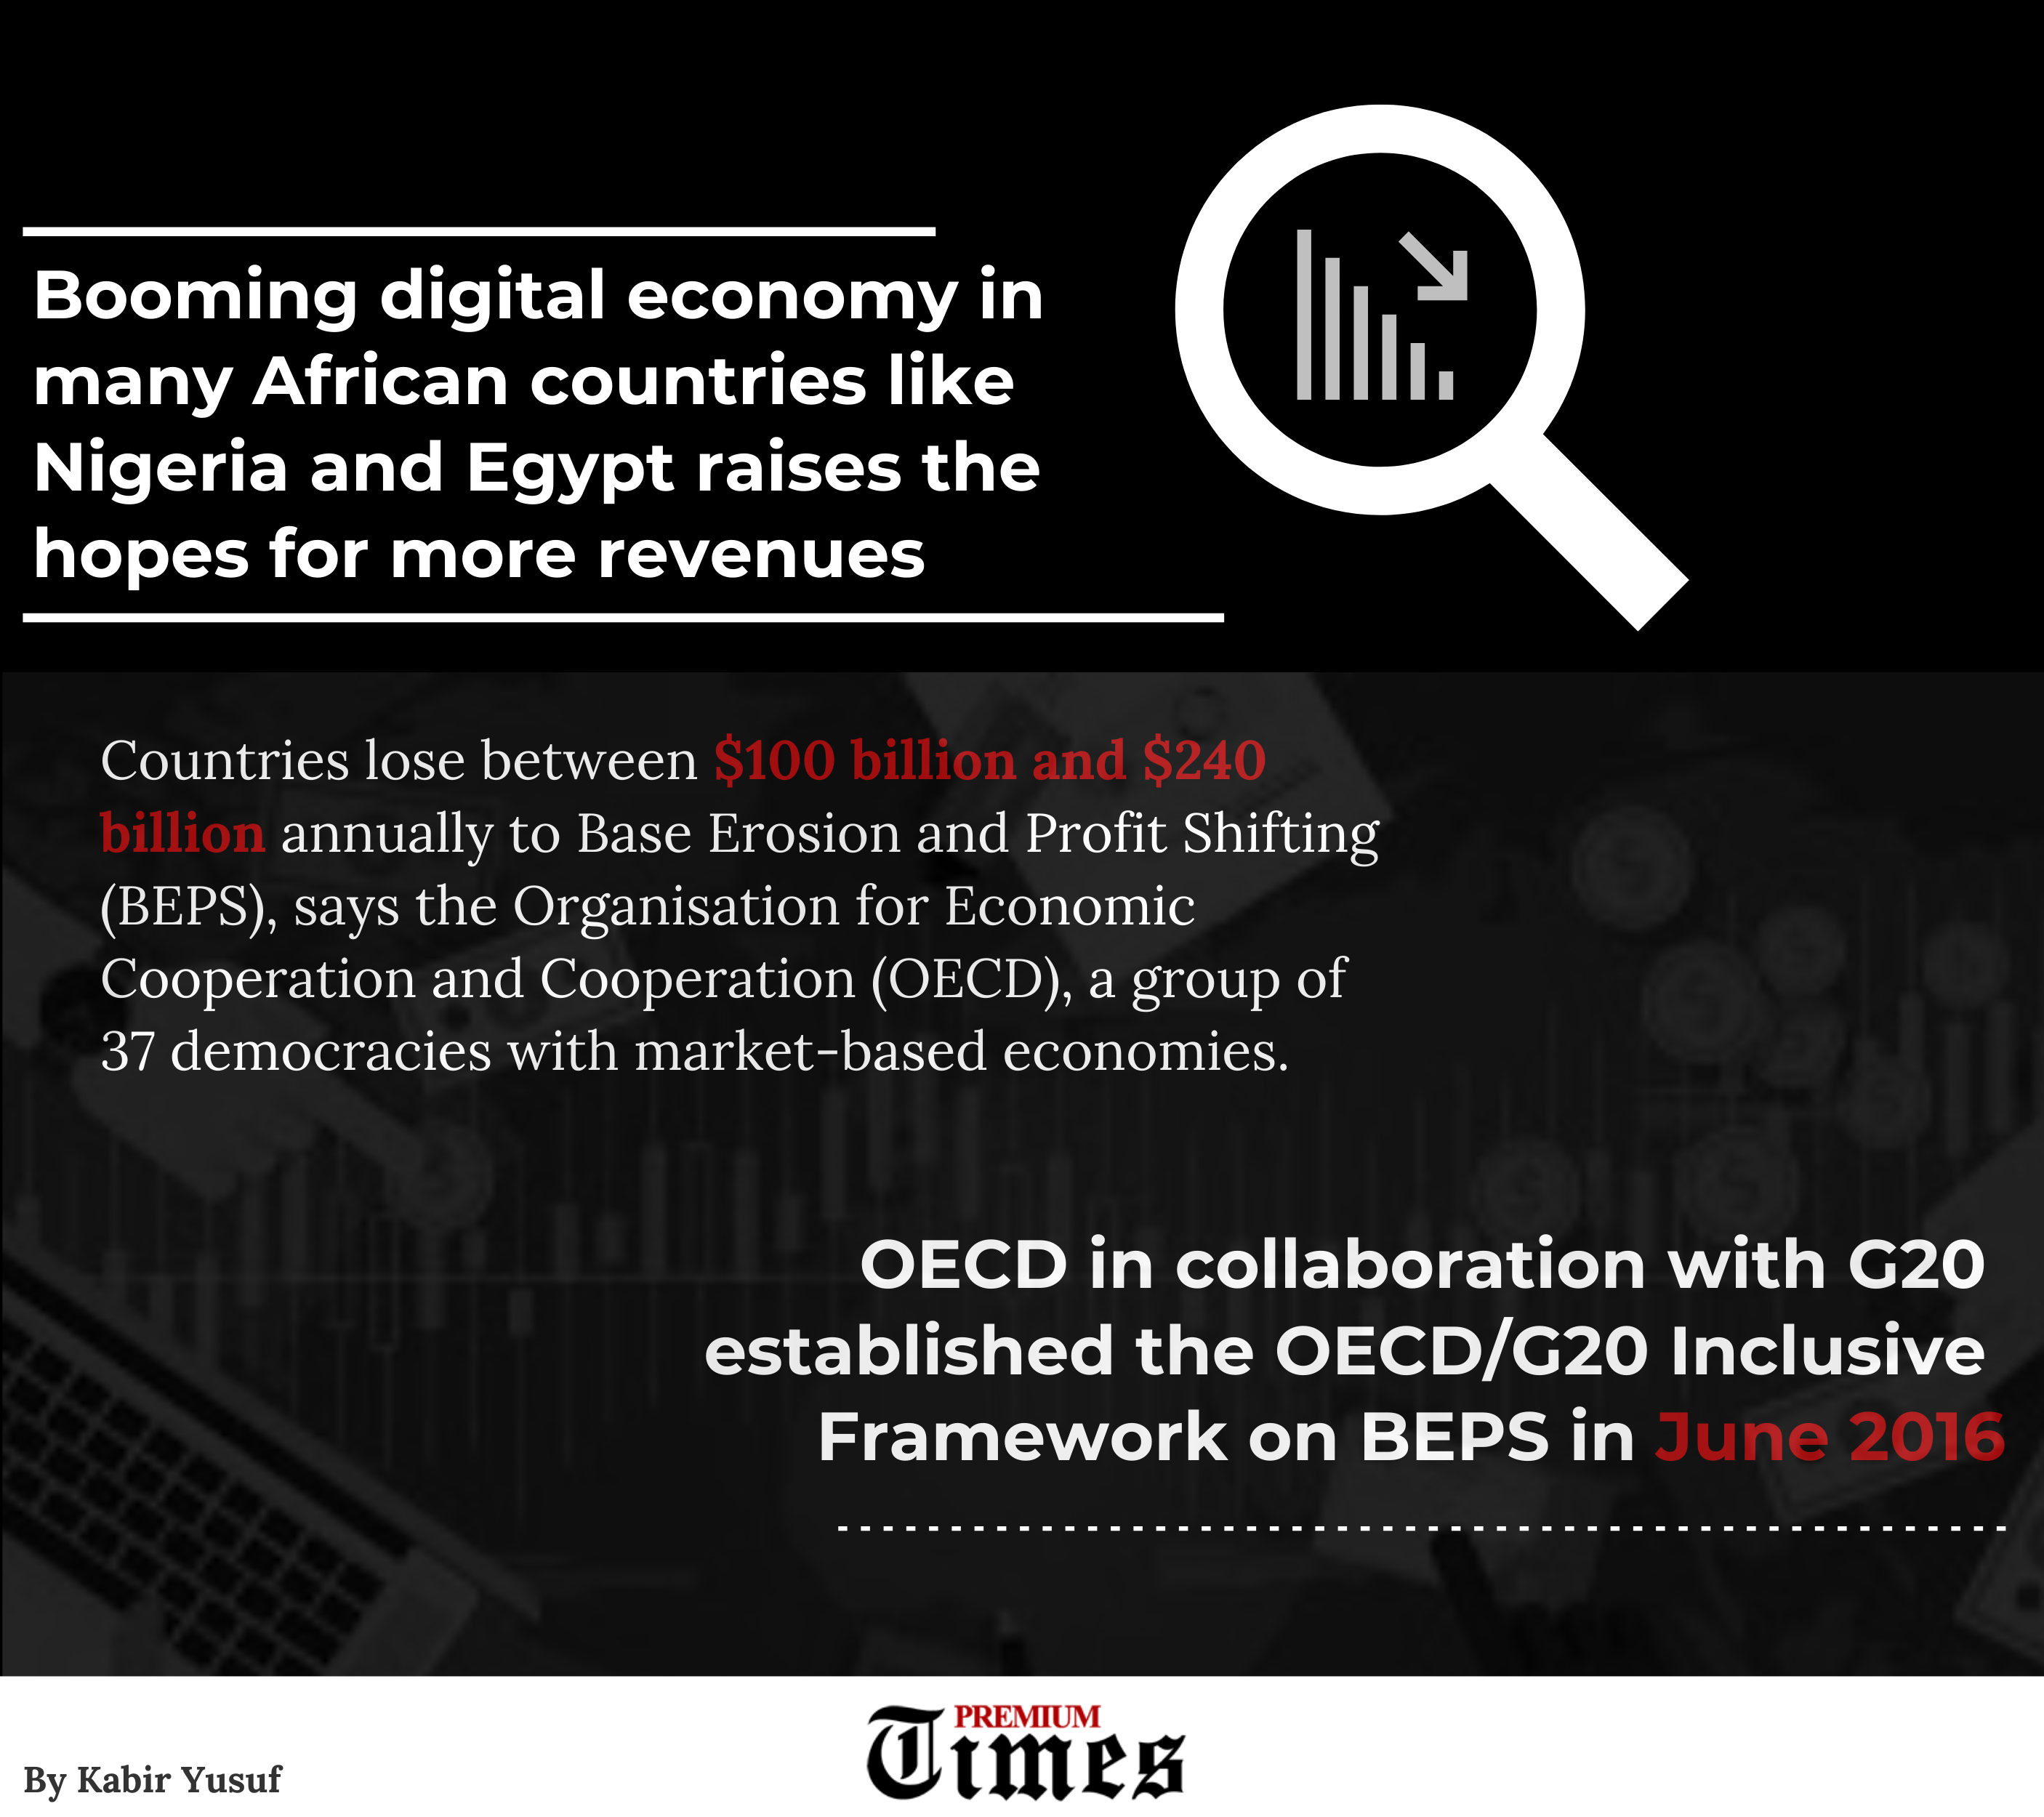 Digital Economy in many African Countries